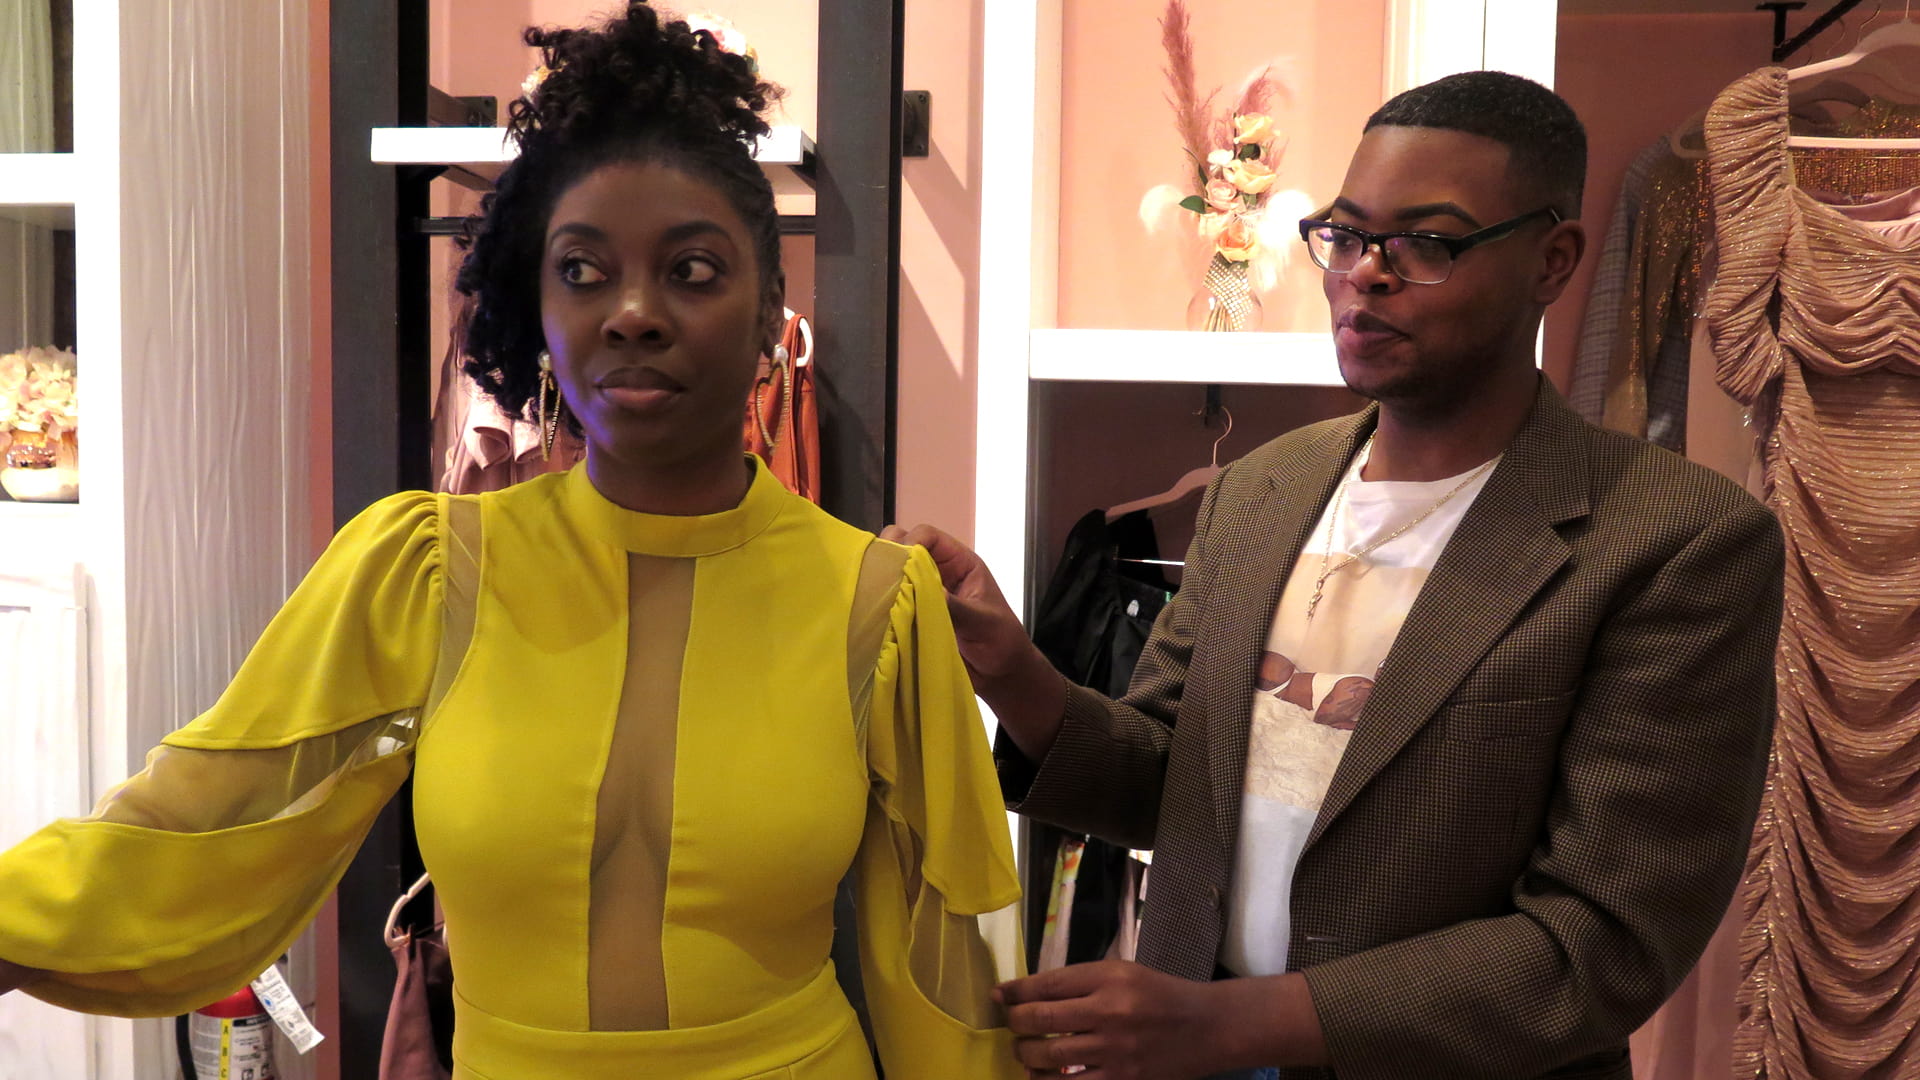 Derrick Tre '17 assists with a dress fitting at Captivate, the boutique where he is a manager.